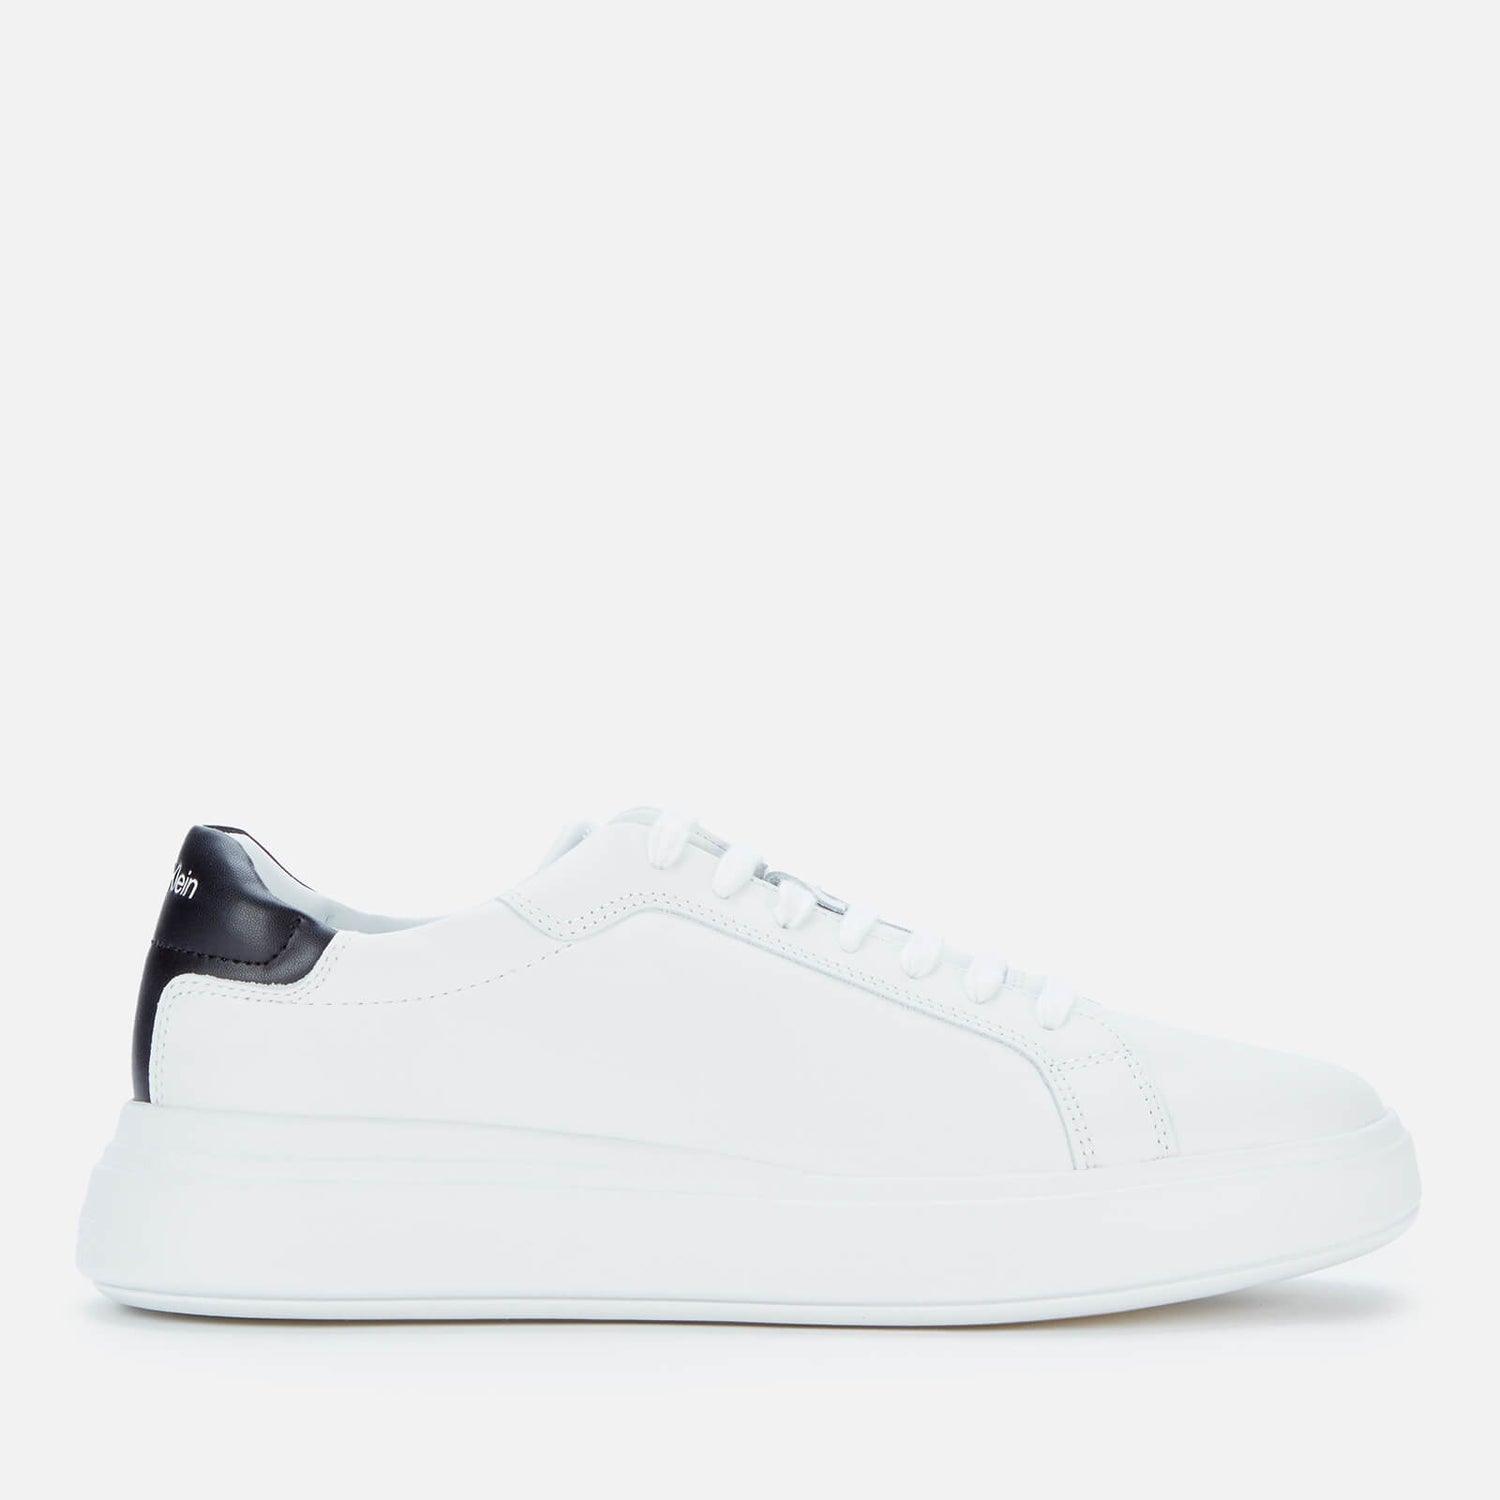 Calvin Klein Men's Leather Low Top Trainers - White/Black - UK 10.5